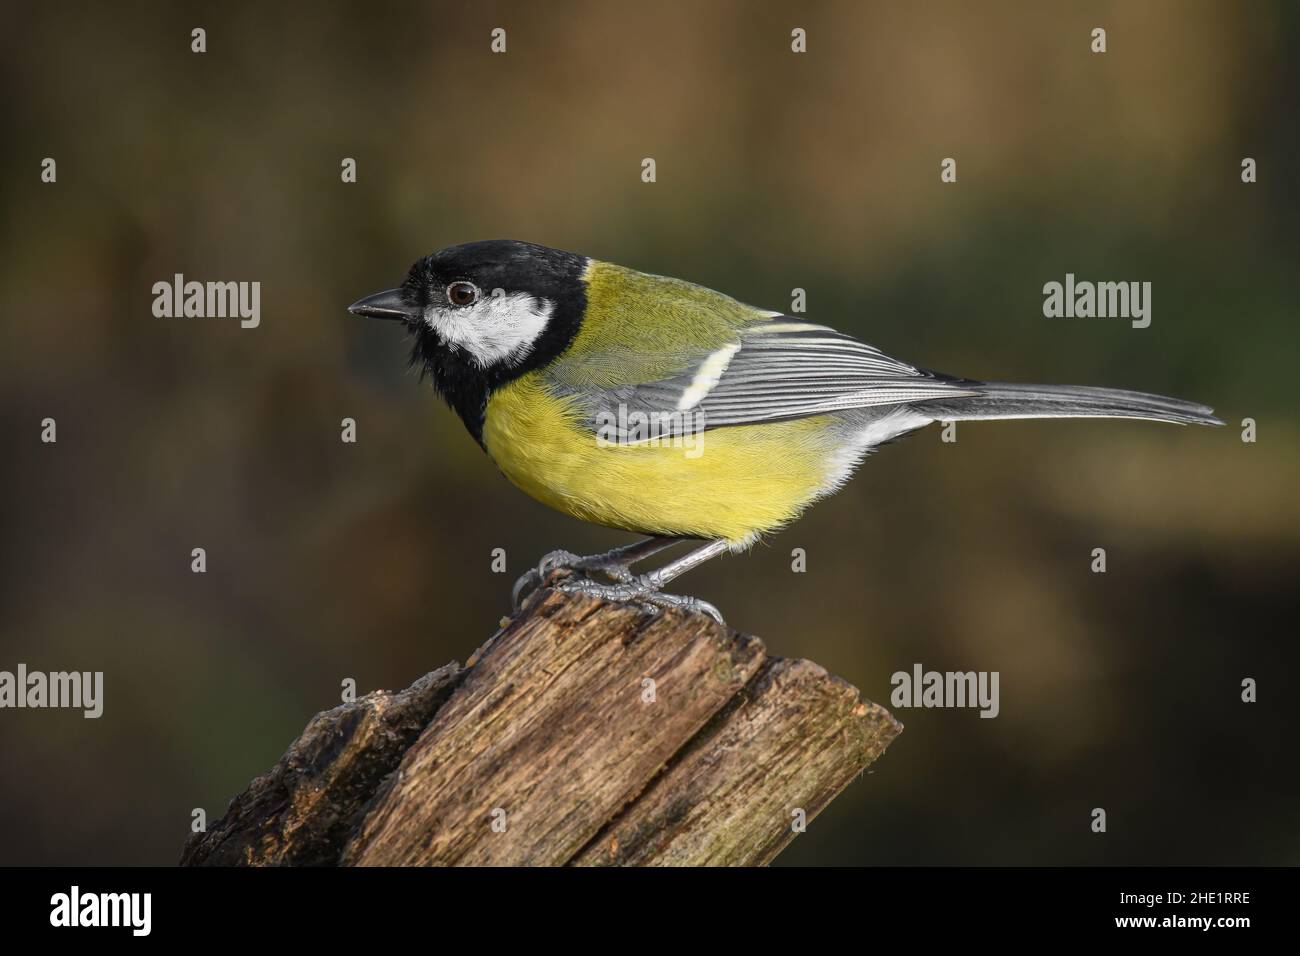 Perched on an old tree stump is a side profile image of a great tit, Parus major. Stock Photo